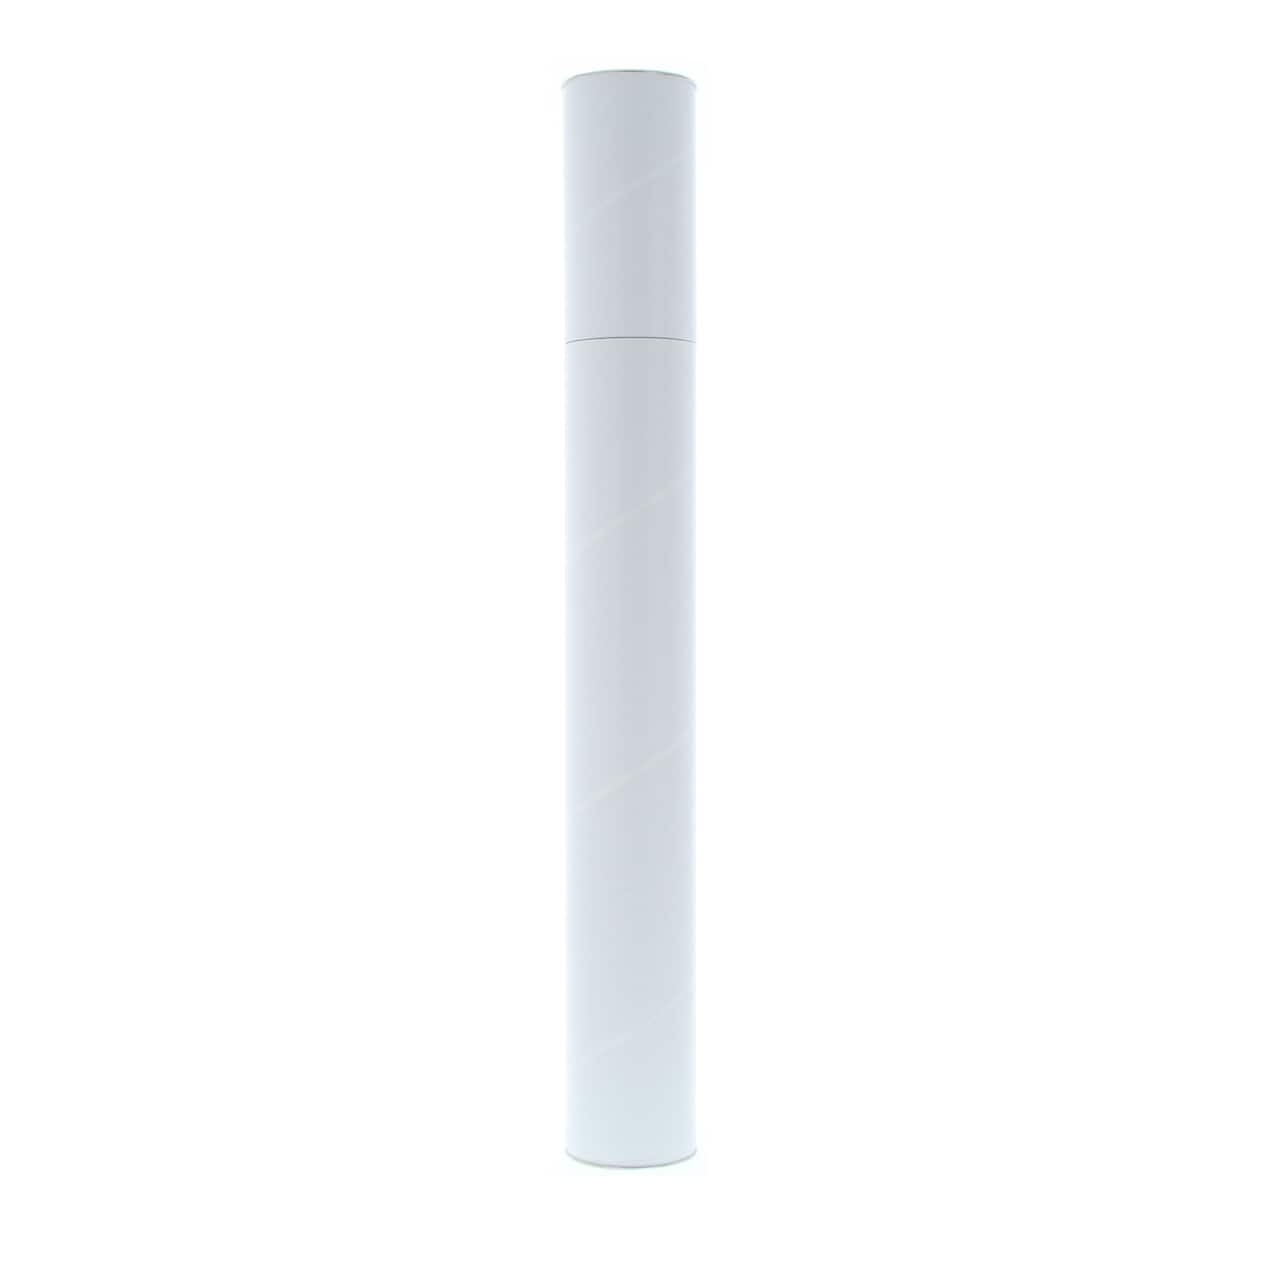 Chicago Mailing Tube Reinforced Telescopic Mailing Tube